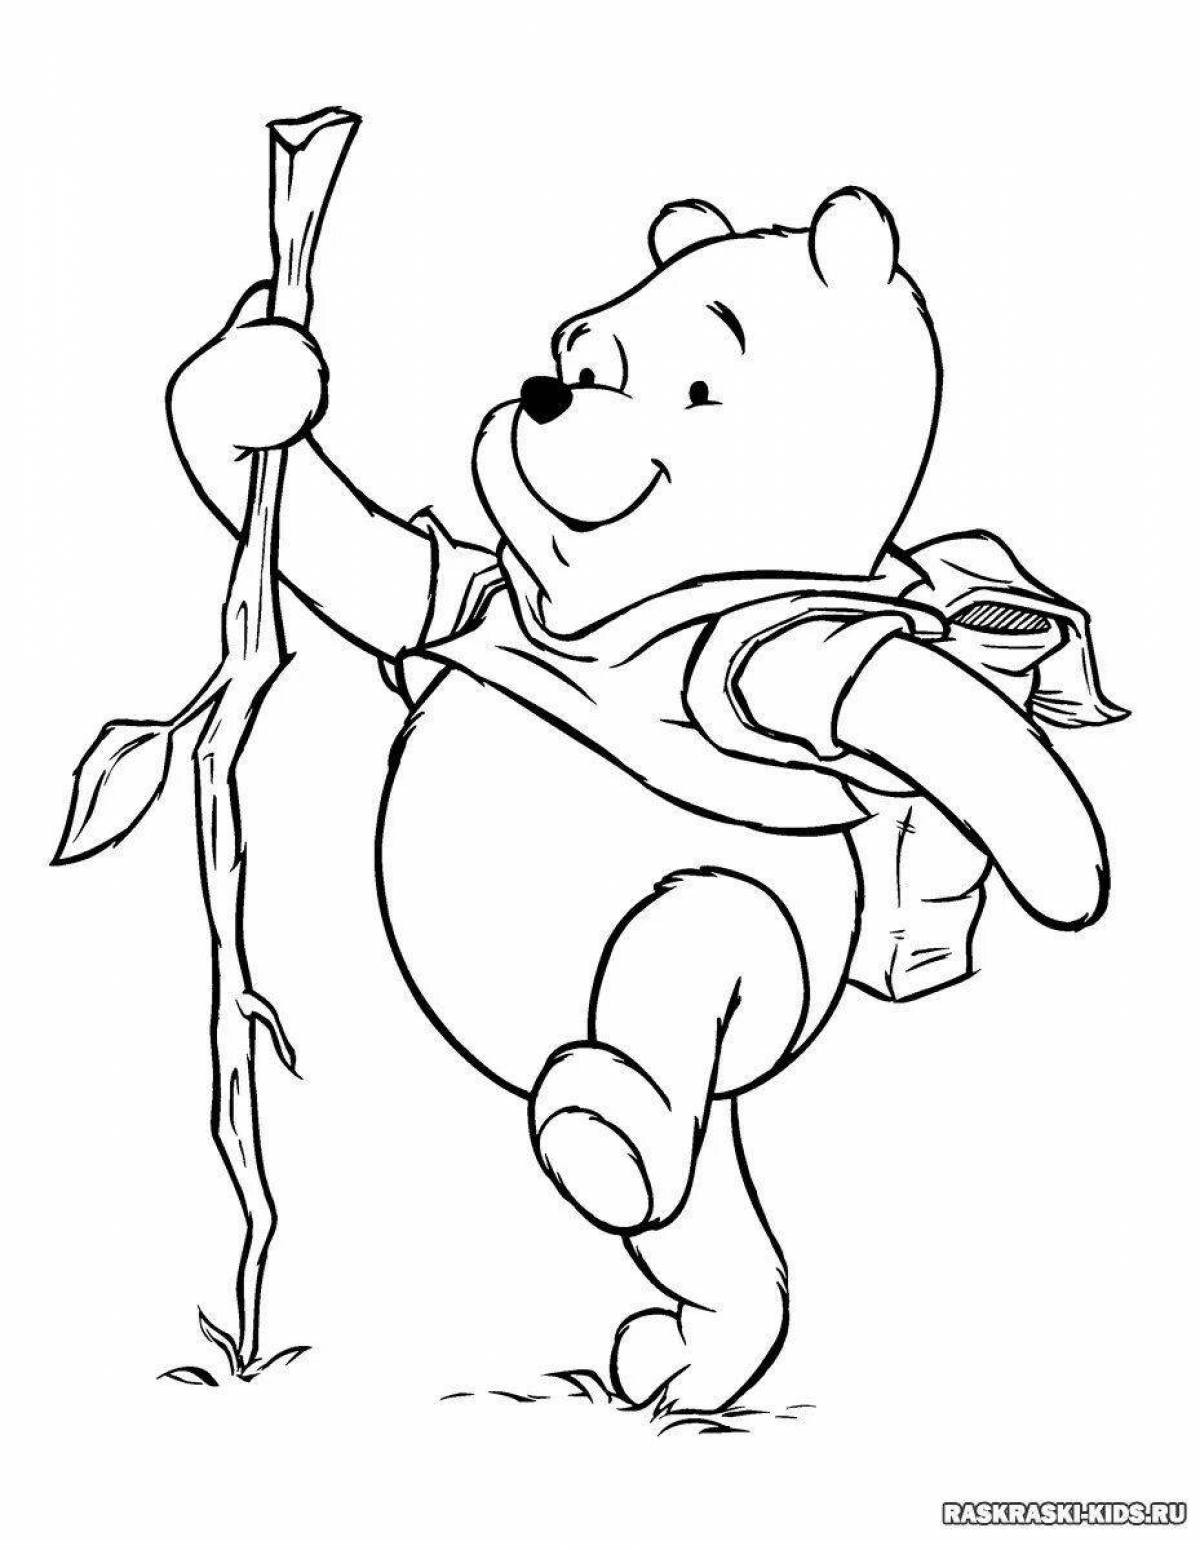 Coloring page funny winnie the pooh and his friends